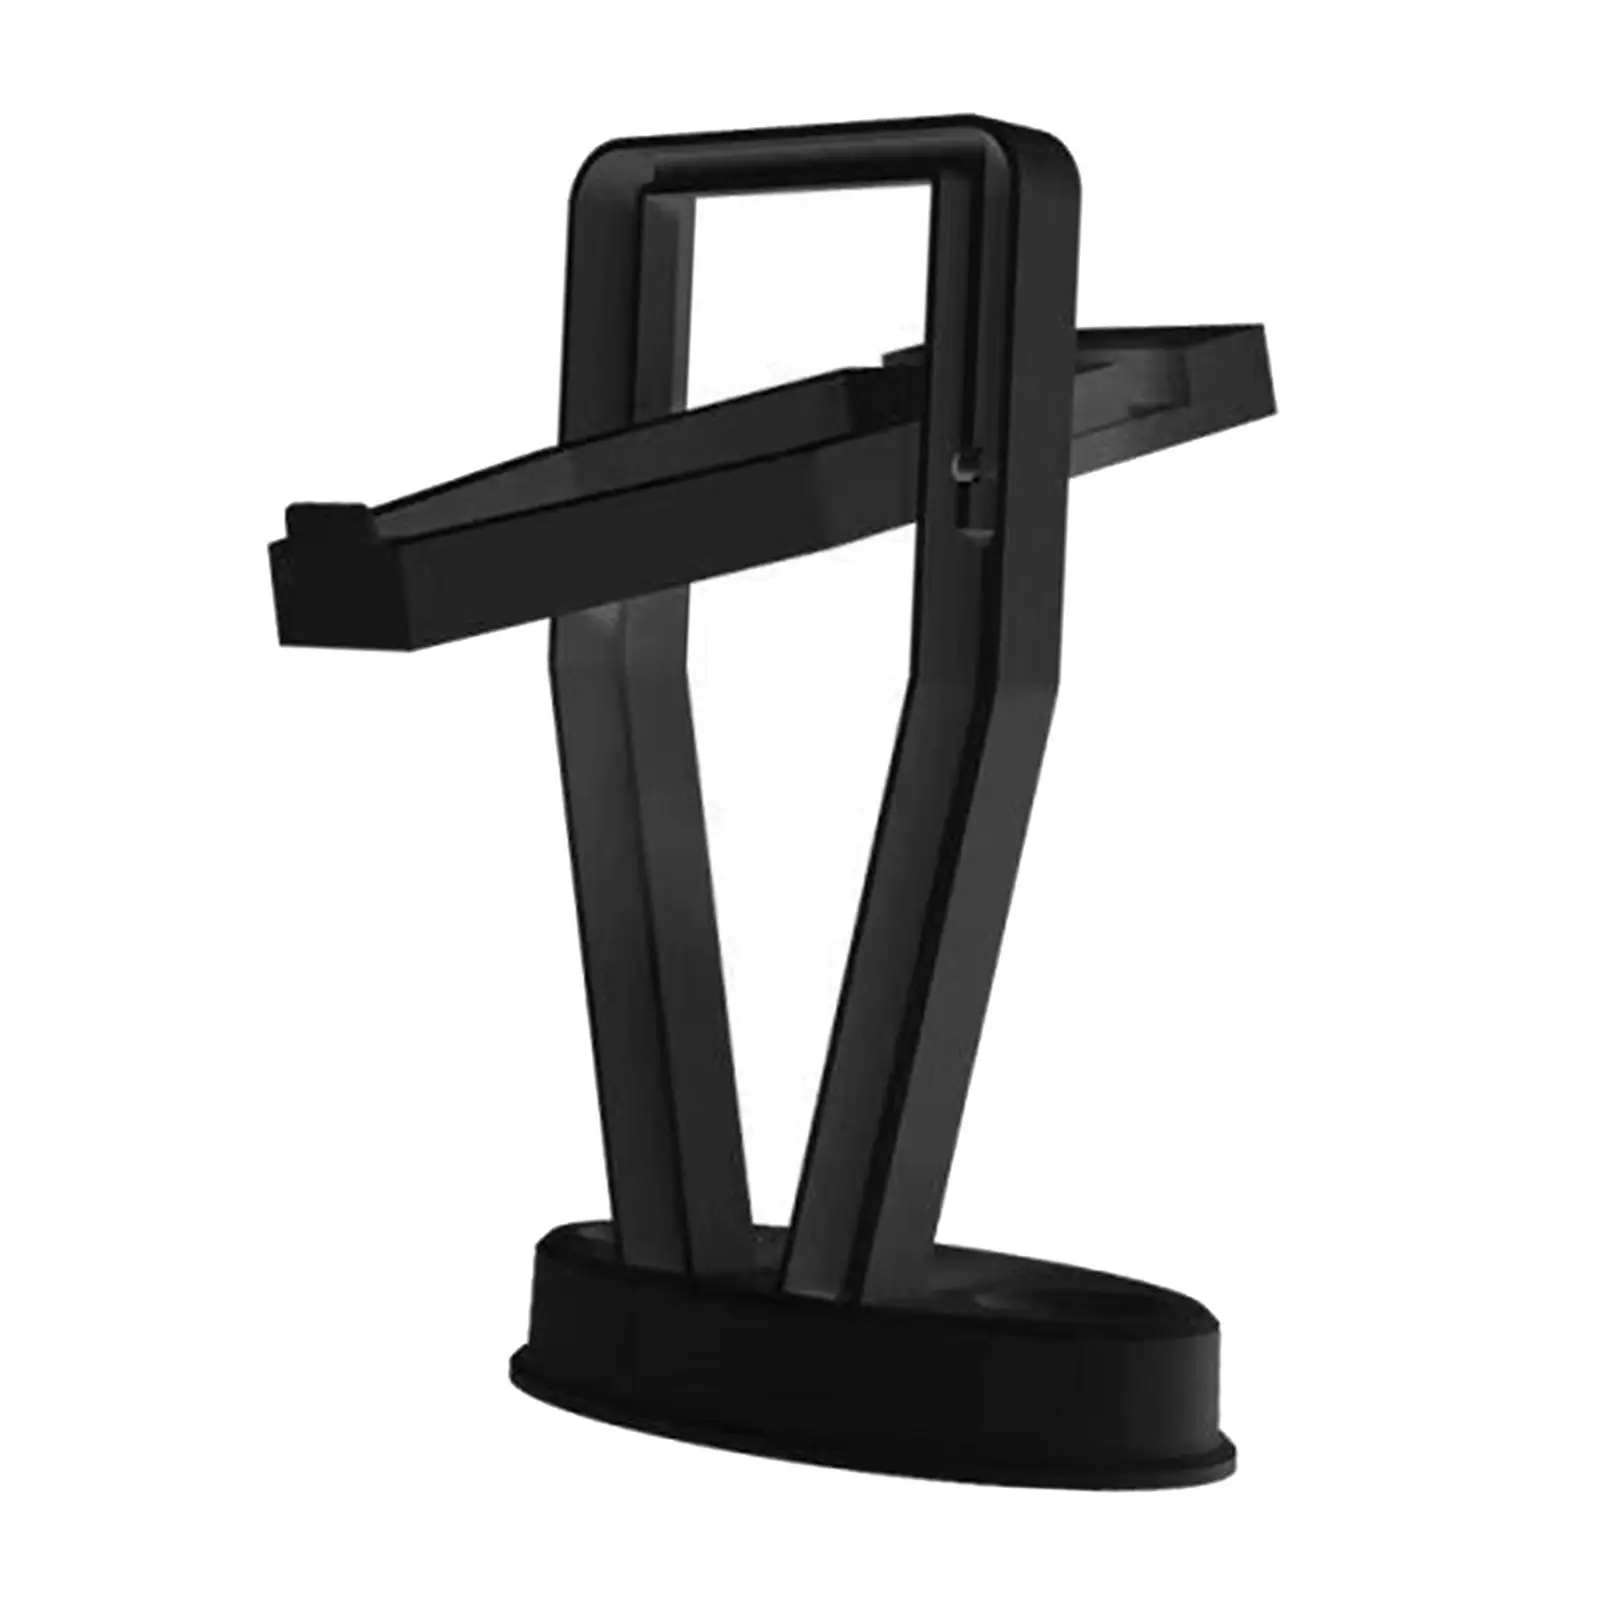 VR Headset Display Stand Stable Stents for Quest 2/PS VR Headset